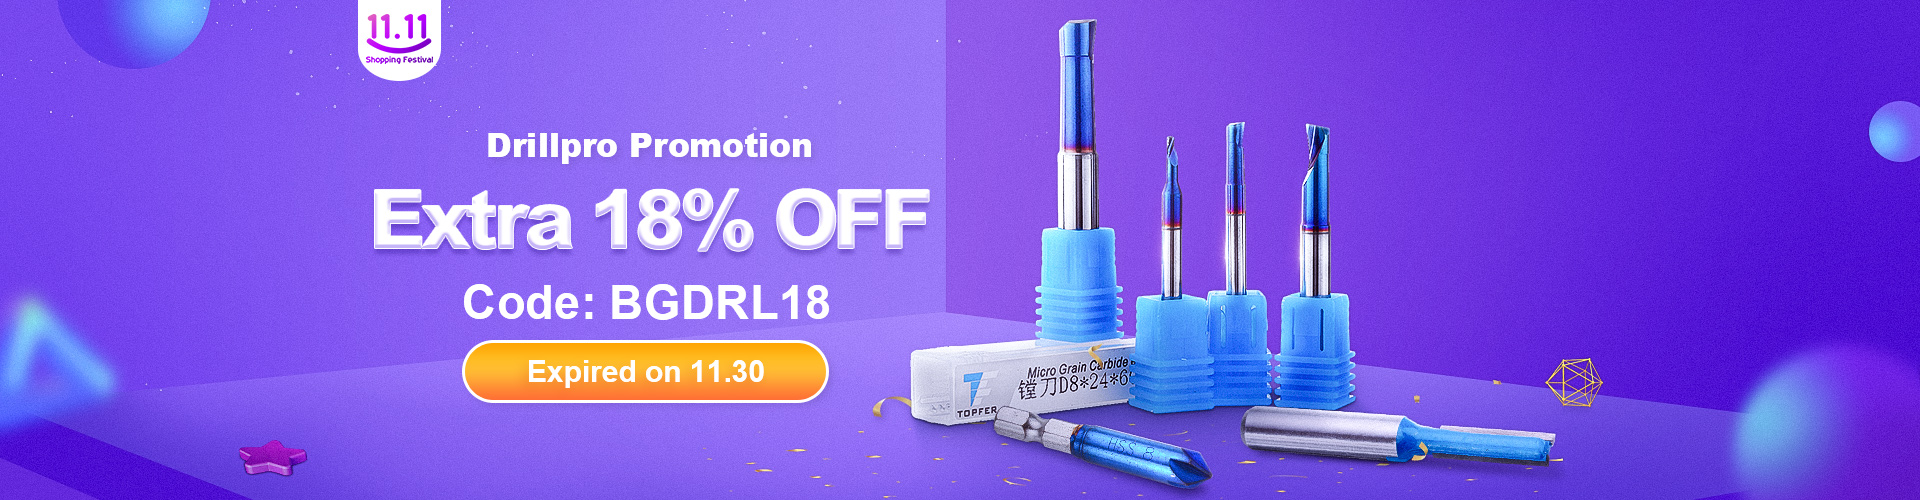 18% OFF for Drillpro Brand Promotion